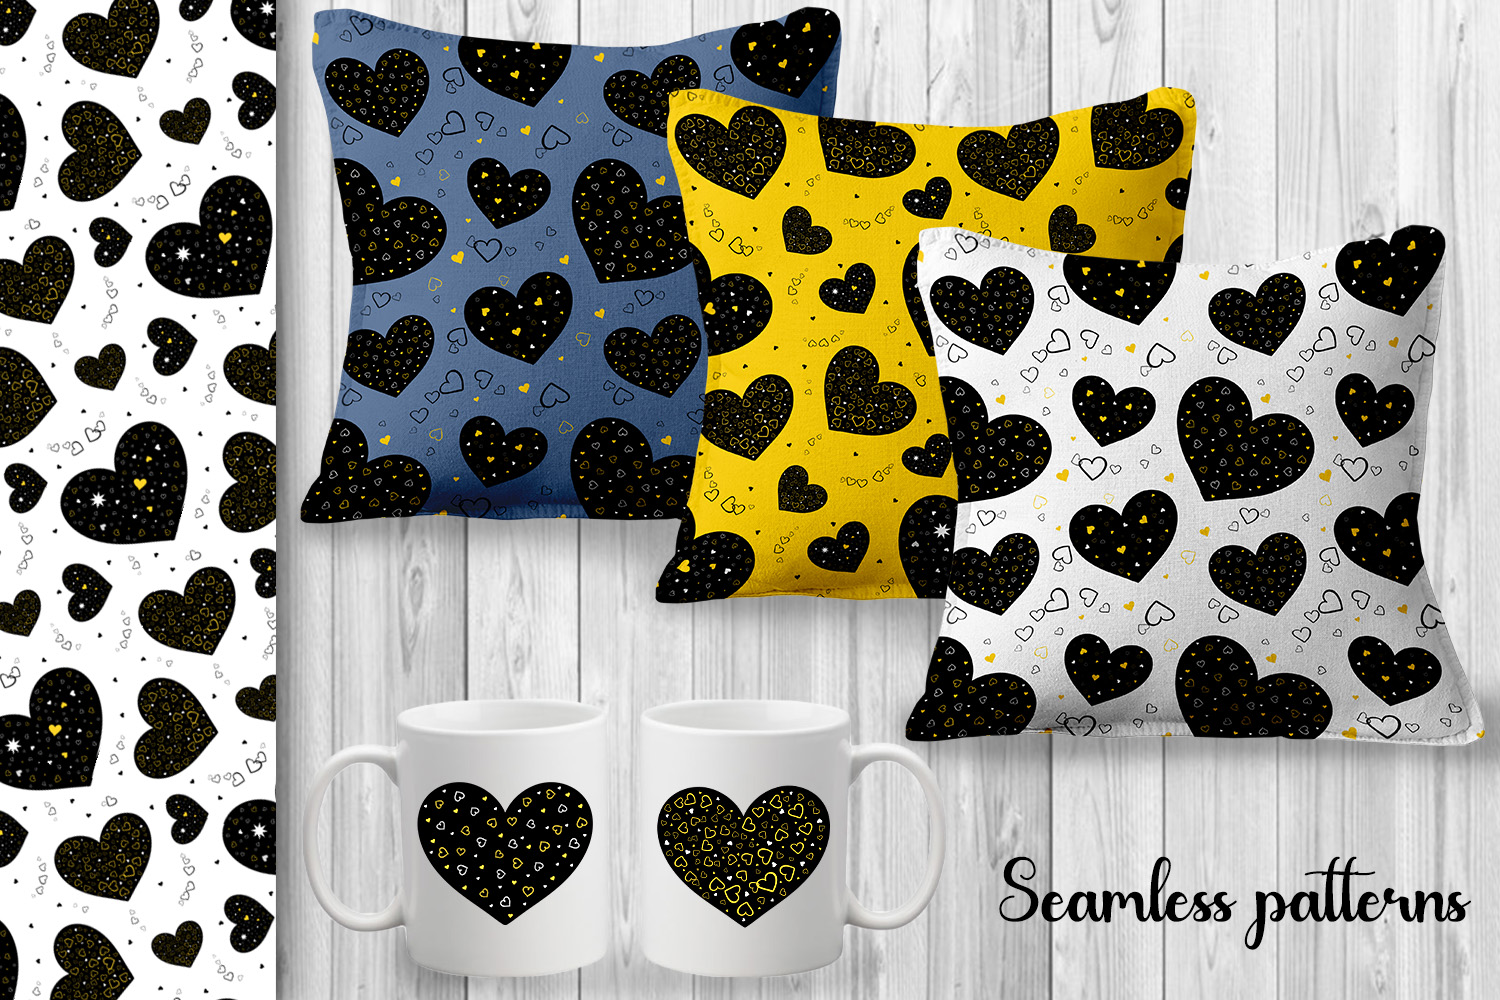 Three pillows in different colors with hearts.